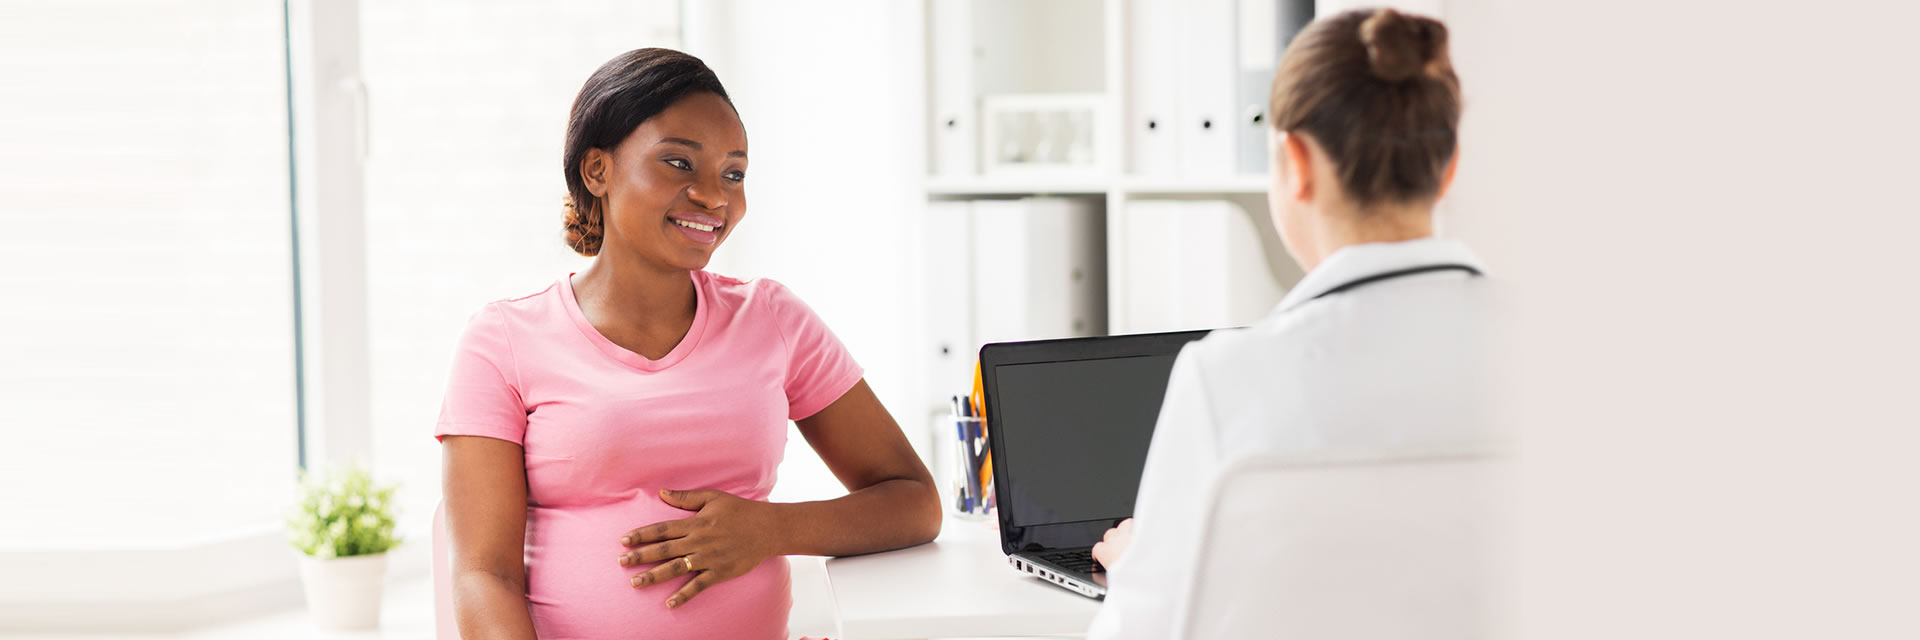 Pregnancy is an important and special time in a woman's life, and  expertised care can help ensure a healthy pregnanc…